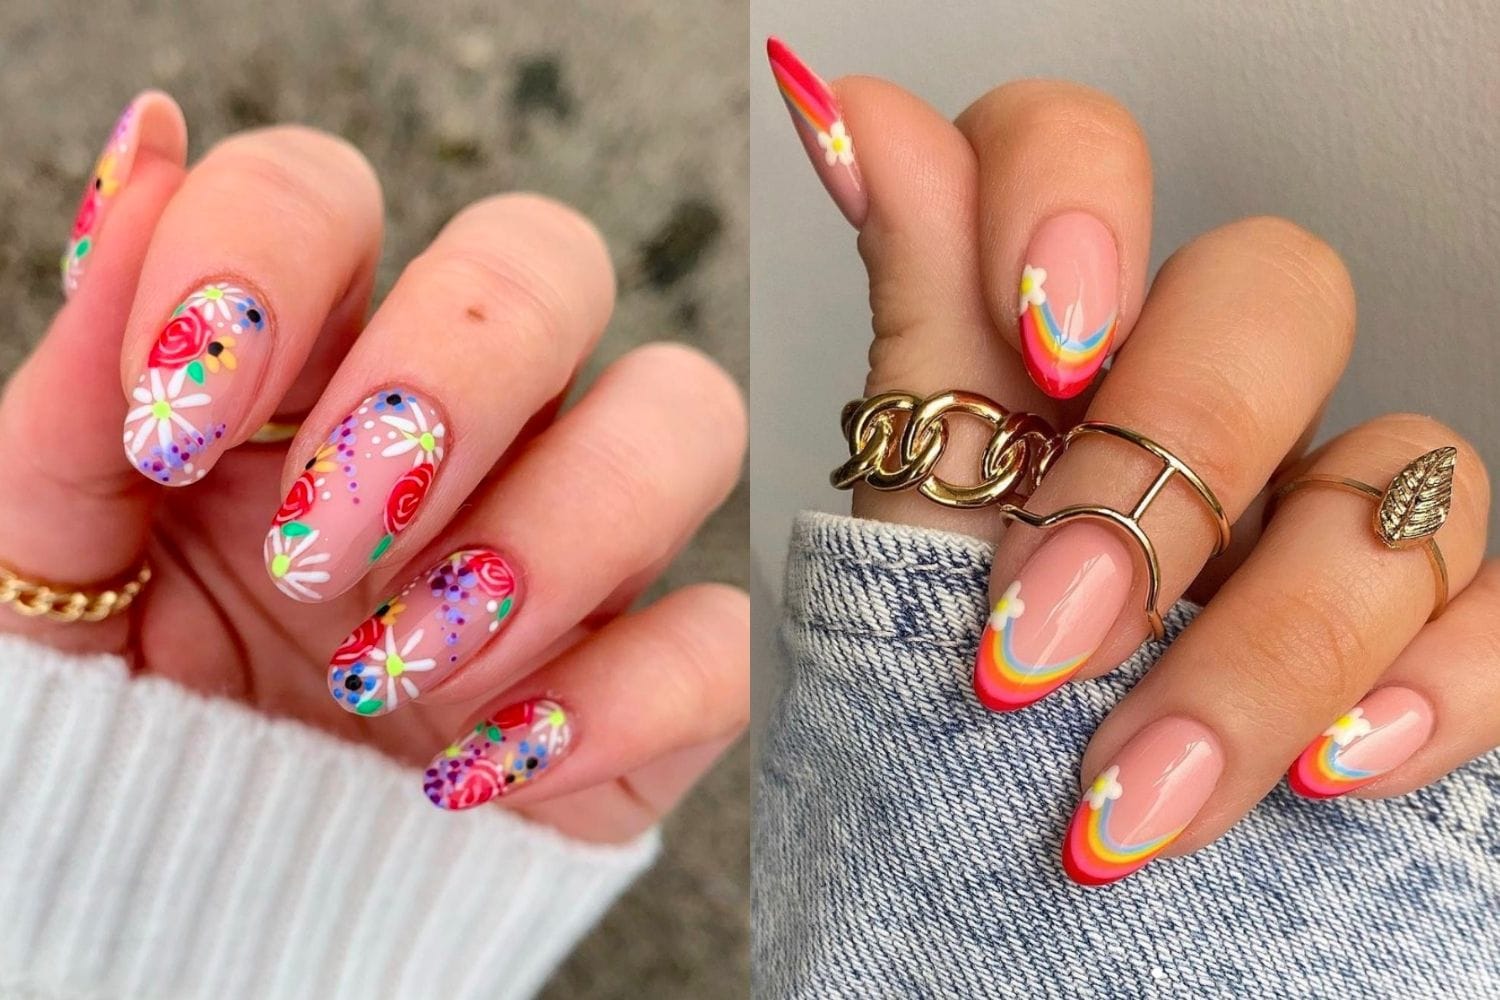 3. Spring Nail Trends: ANC Nail Colors to Try - wide 3